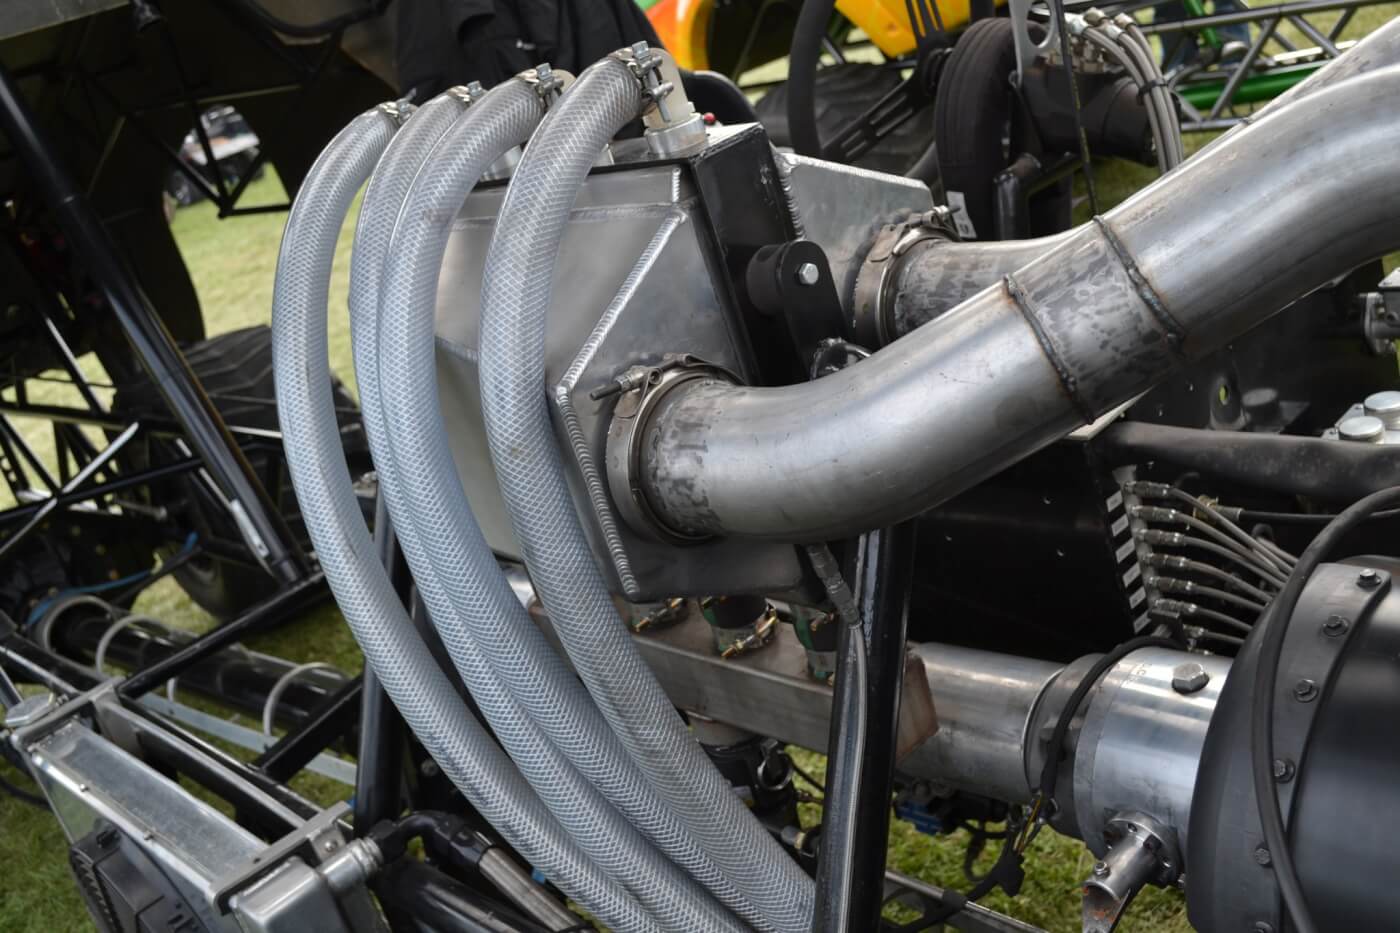 A heavily reinforced Precision air-to-water intercooler is used to control intake air temperatures down to slightly above ambient. The piping for the intercooler was built by Crank It Up Diesel, and the system consumes more than 80 lbs. of ice per pass.